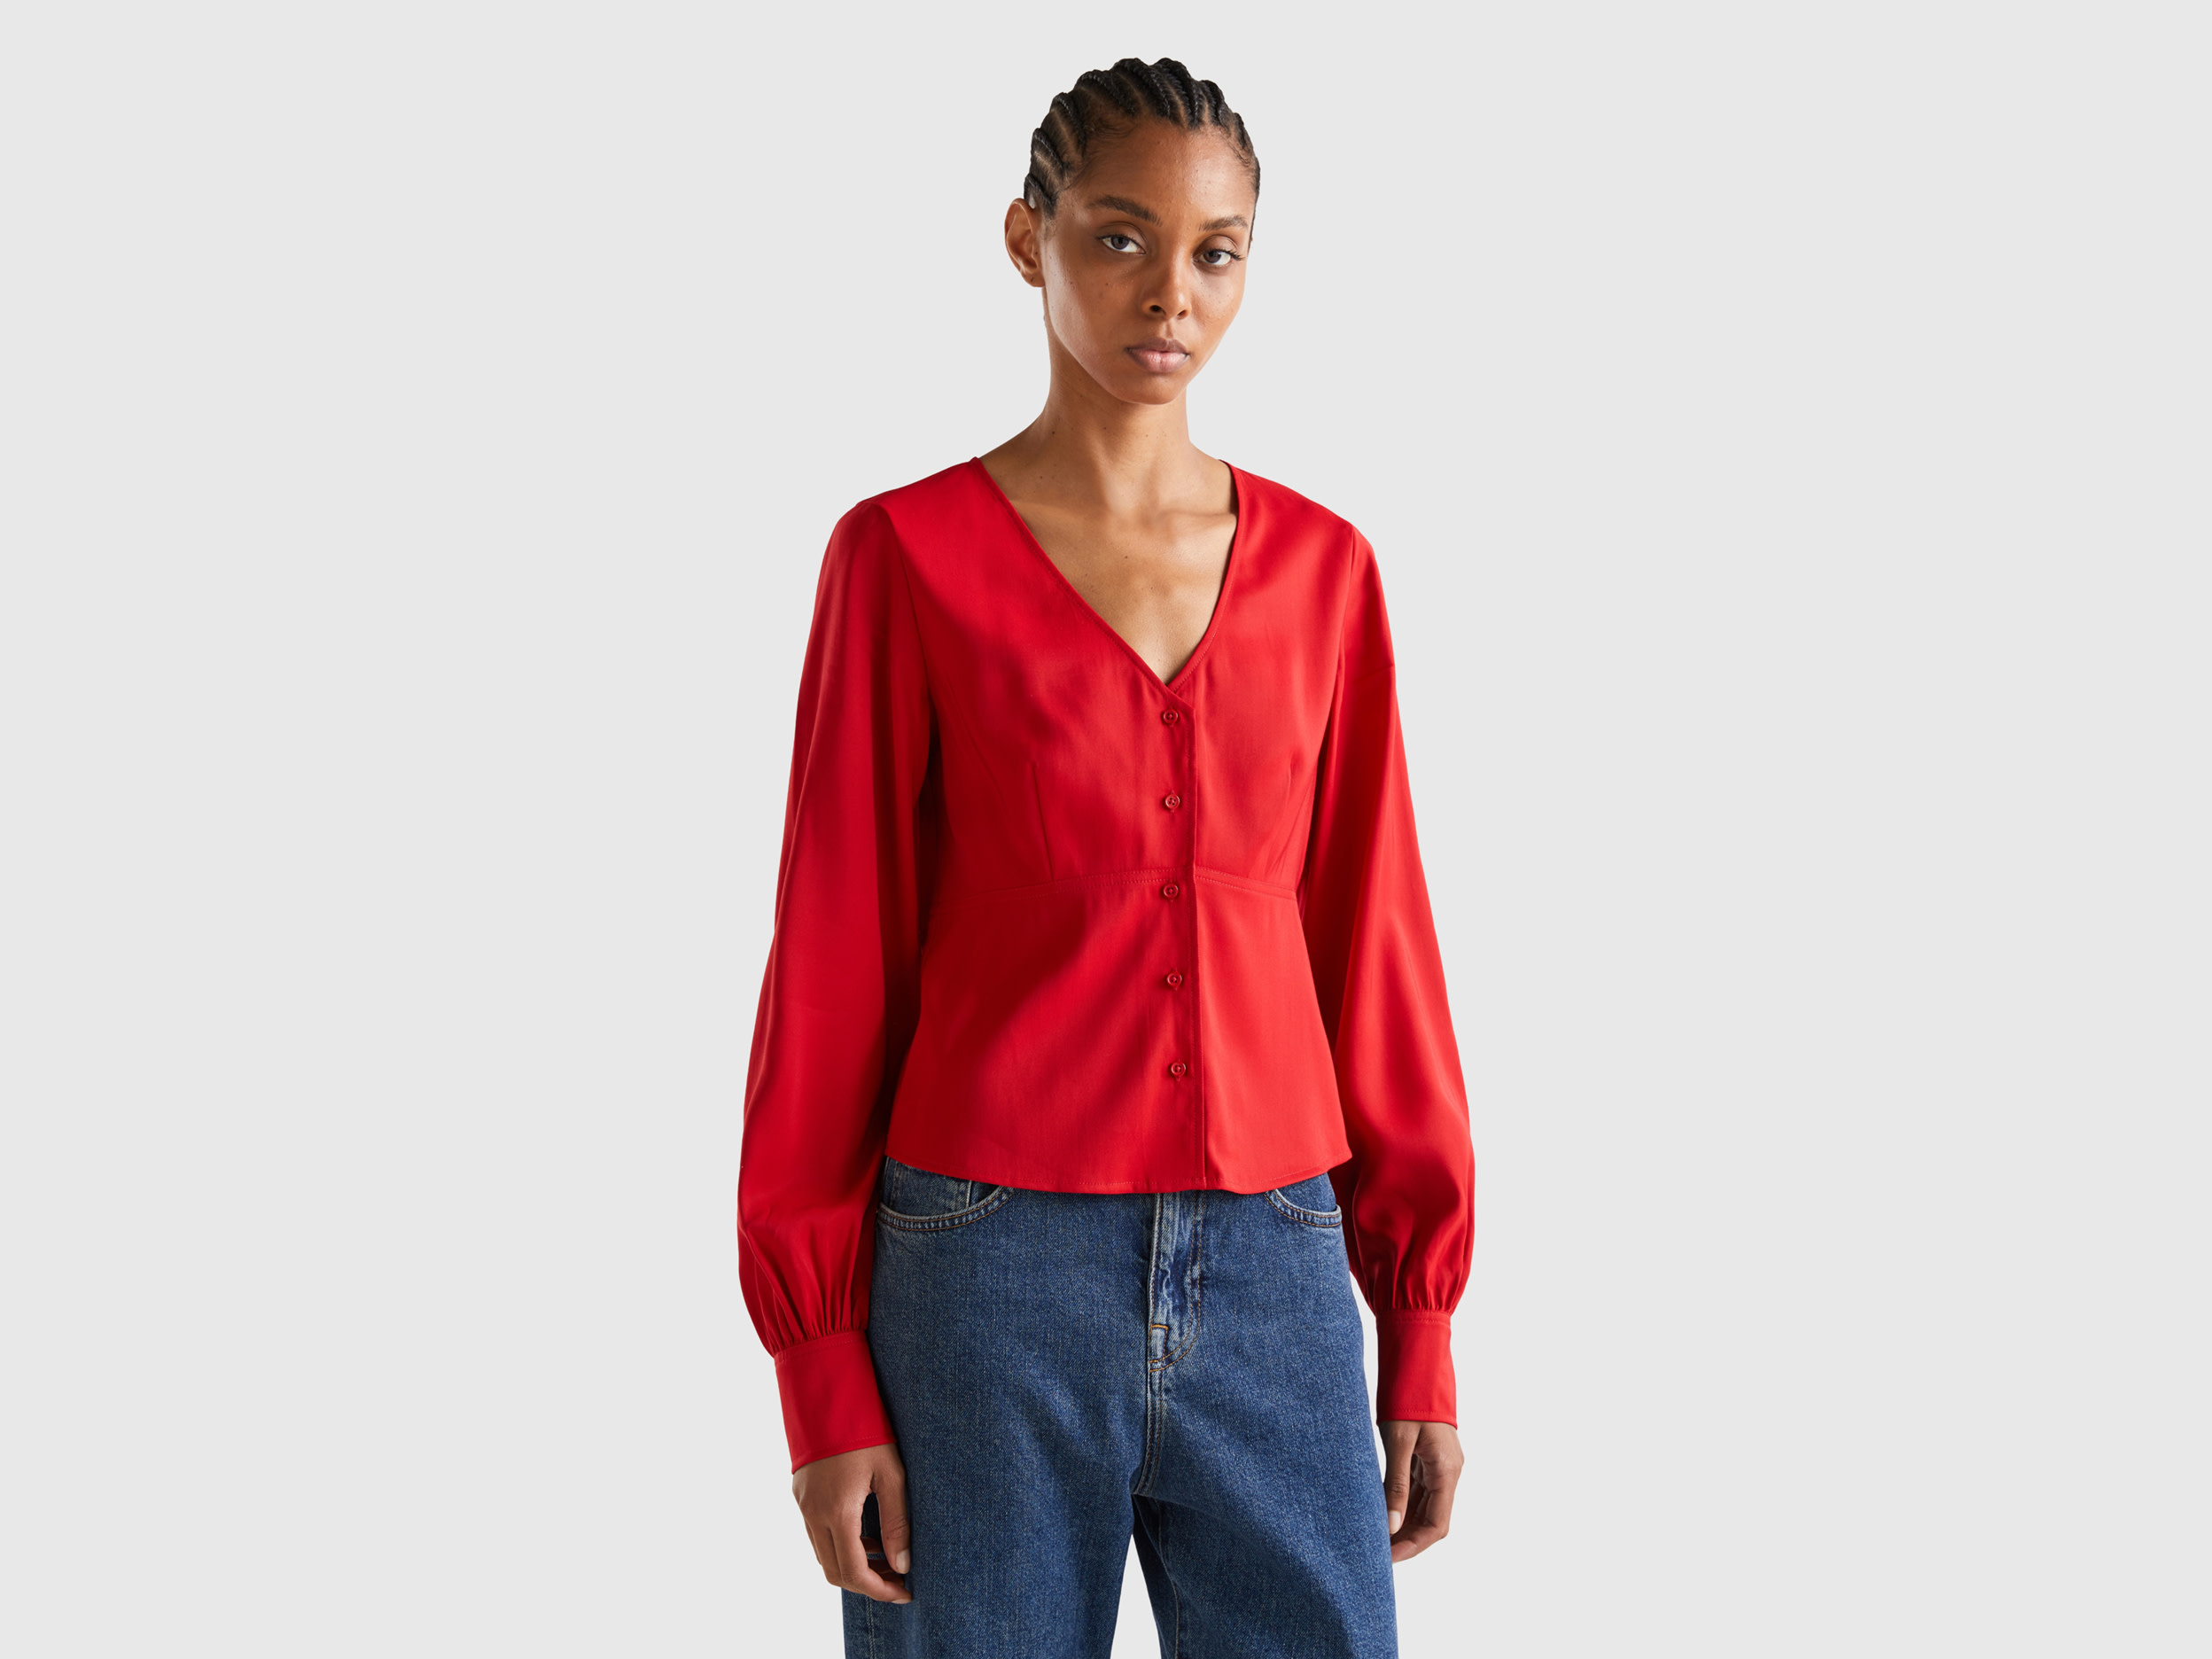 Benetton, V-neck Shirt In 100% Cotton, size XS, Red, Women